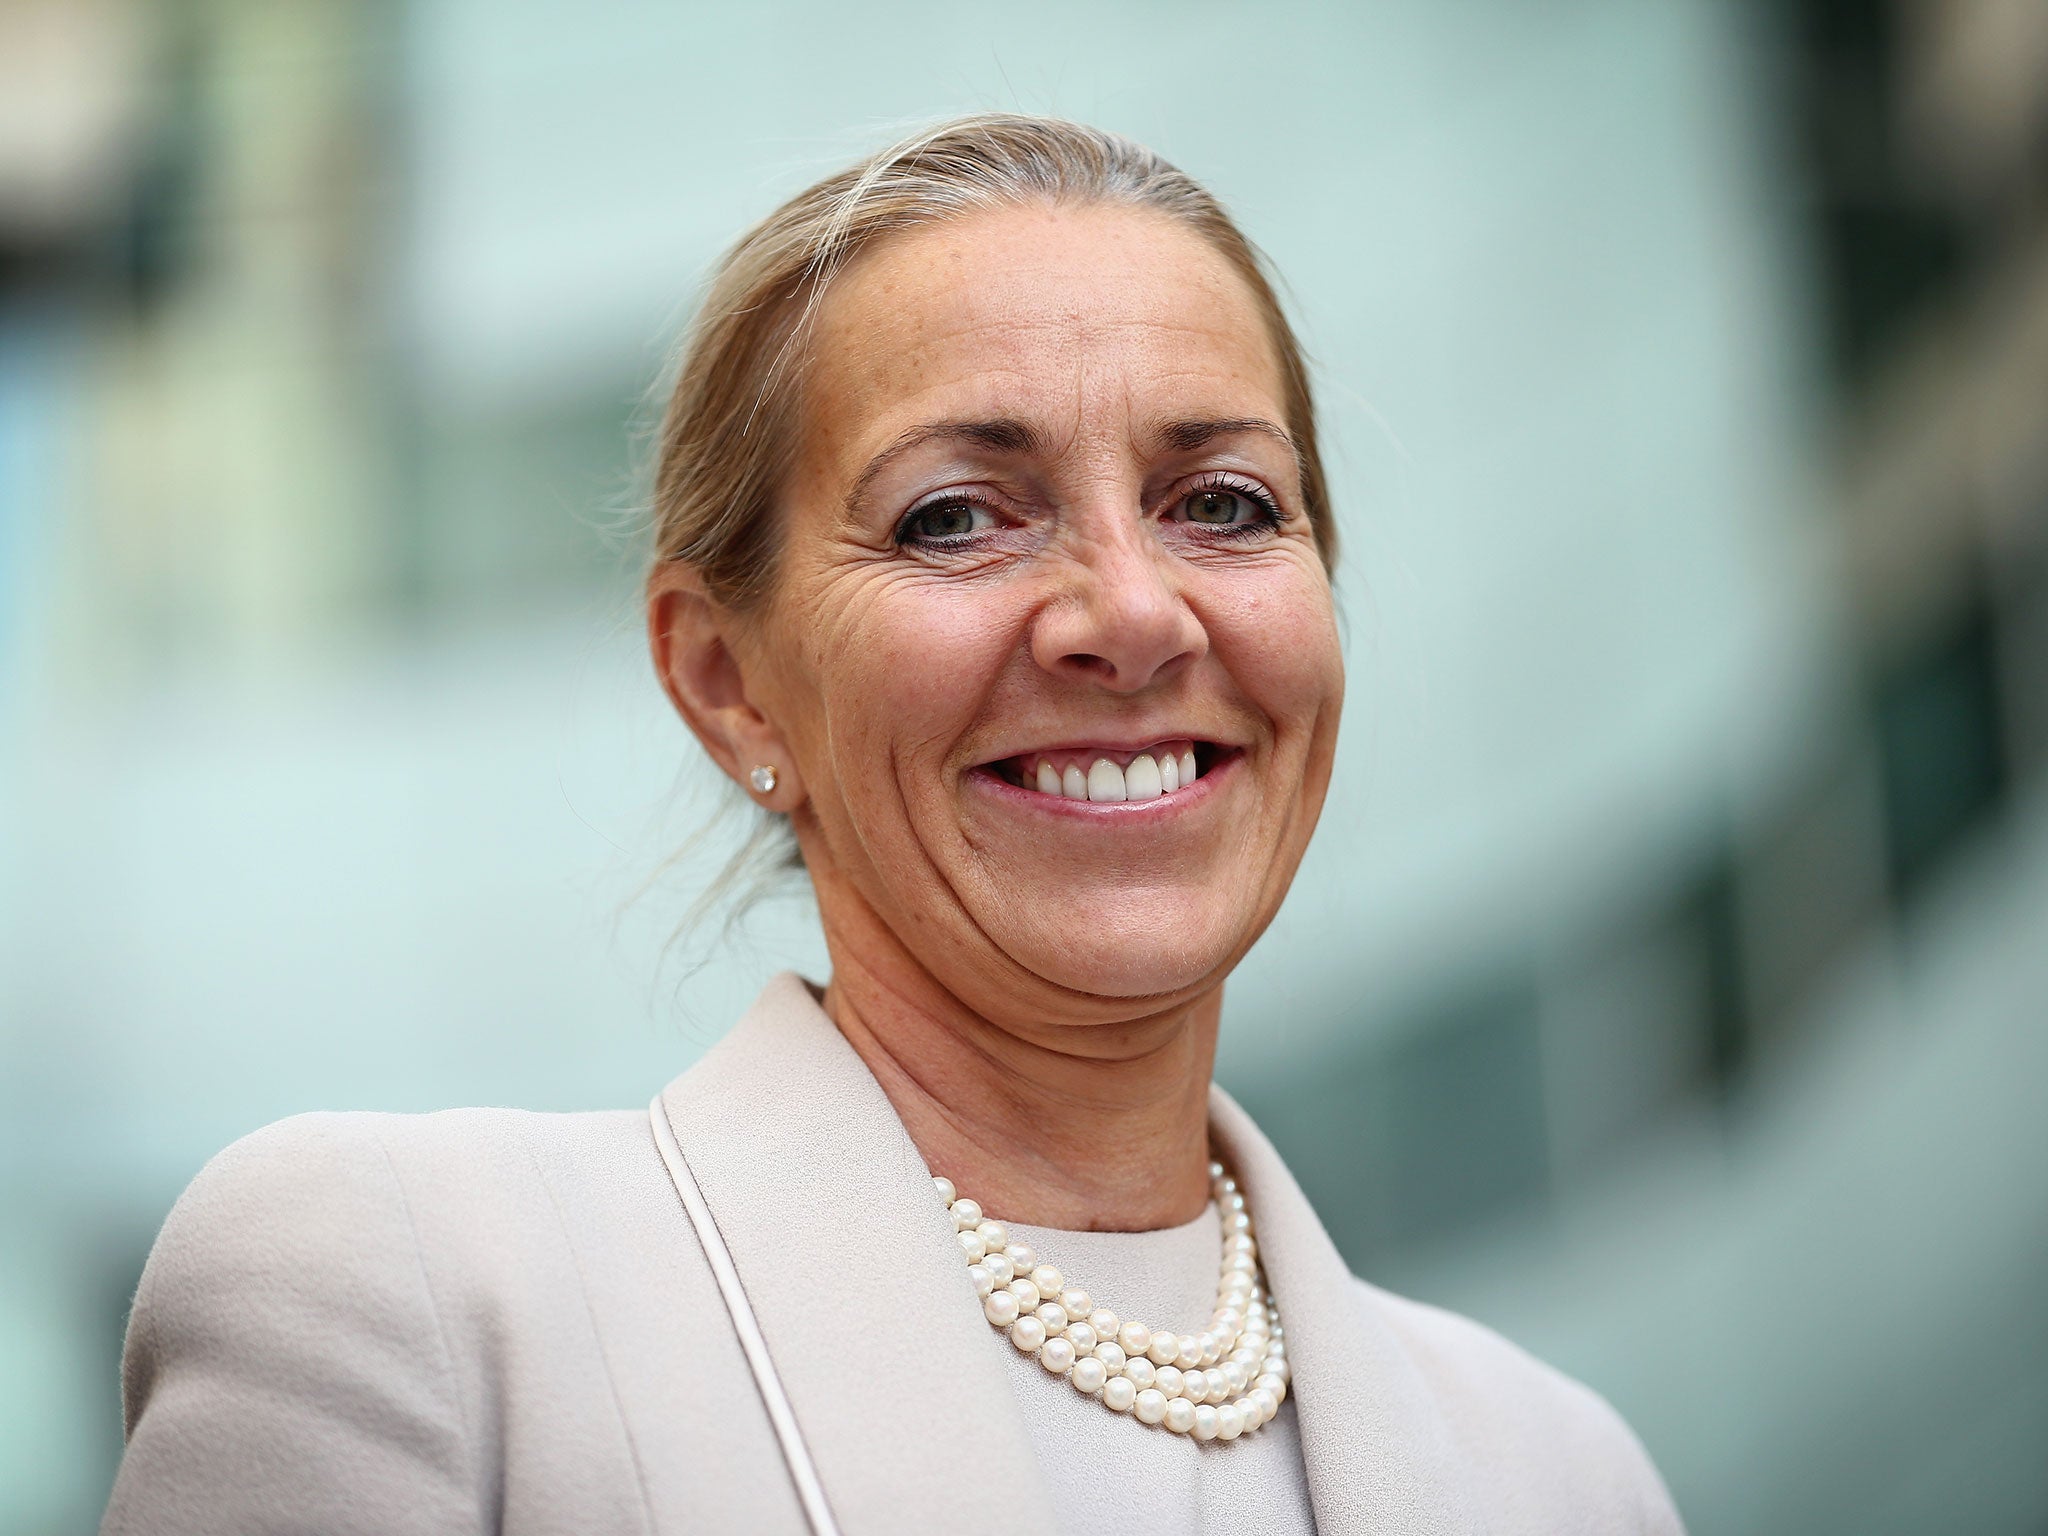 Rona Fairhead warns that 'prejudice' must not sway the argument